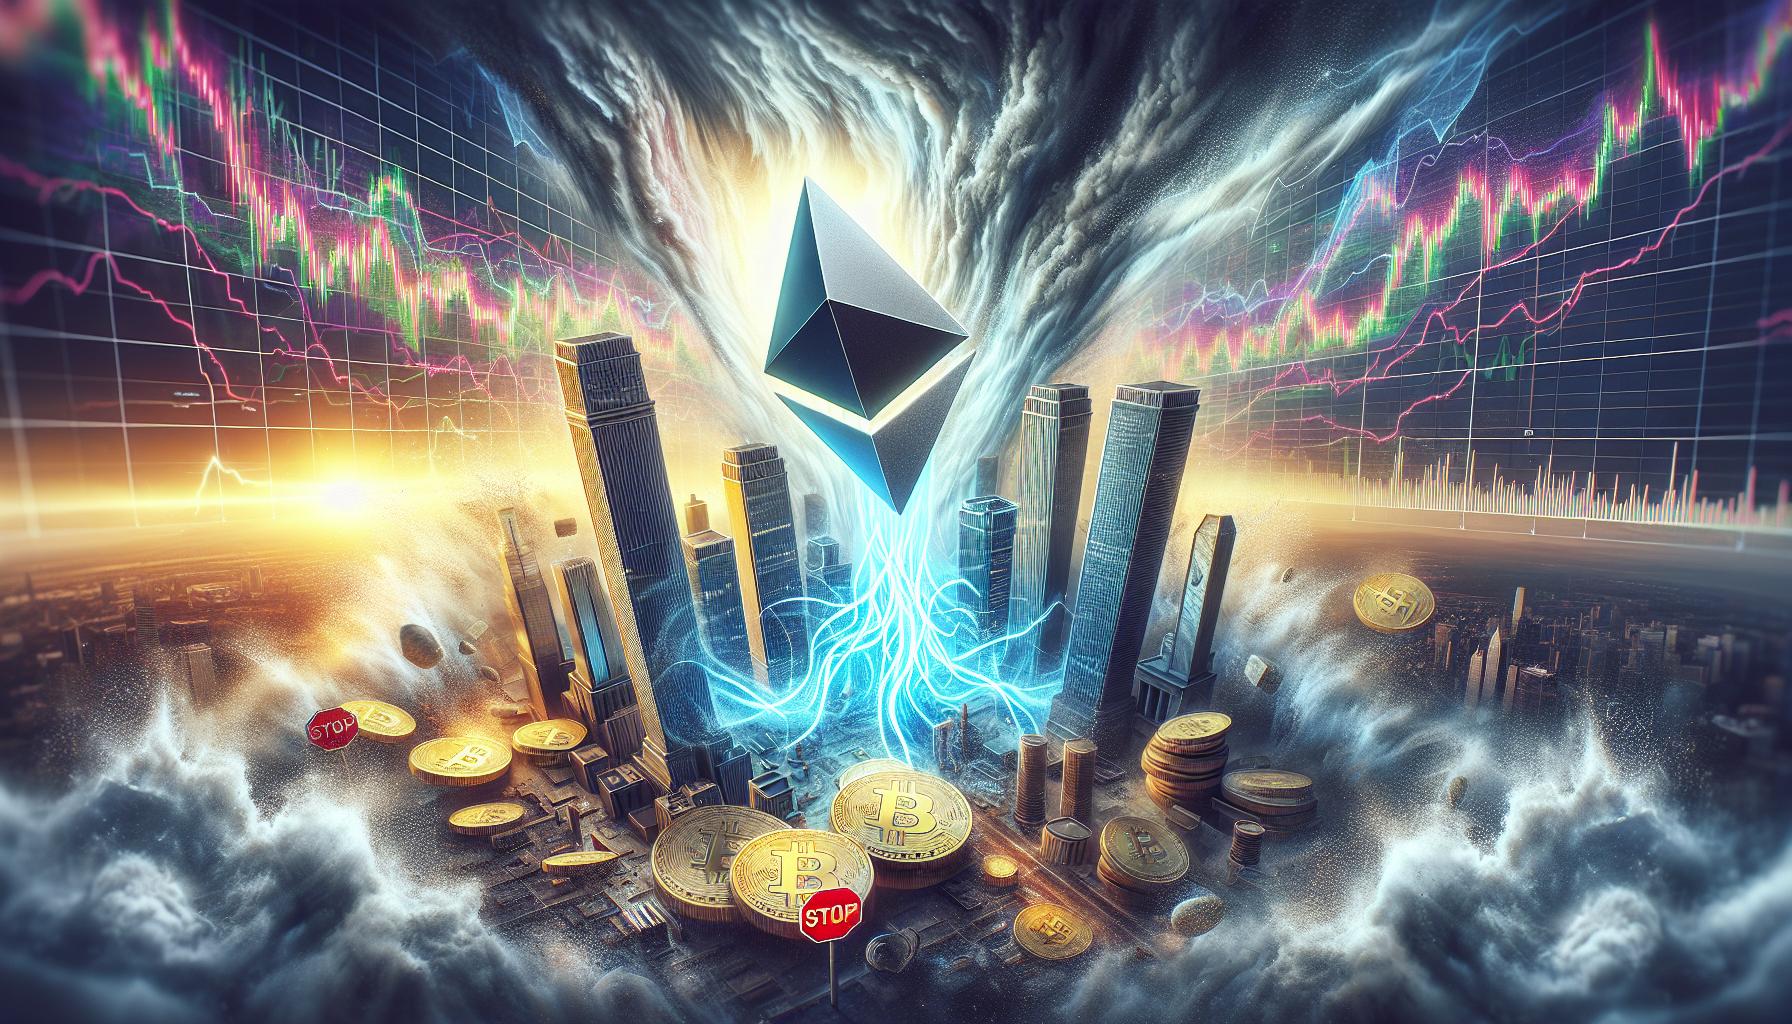 Ethereum's Market Stability Rattled: B Sell-off & SEC's ETF Pause | FinOracle